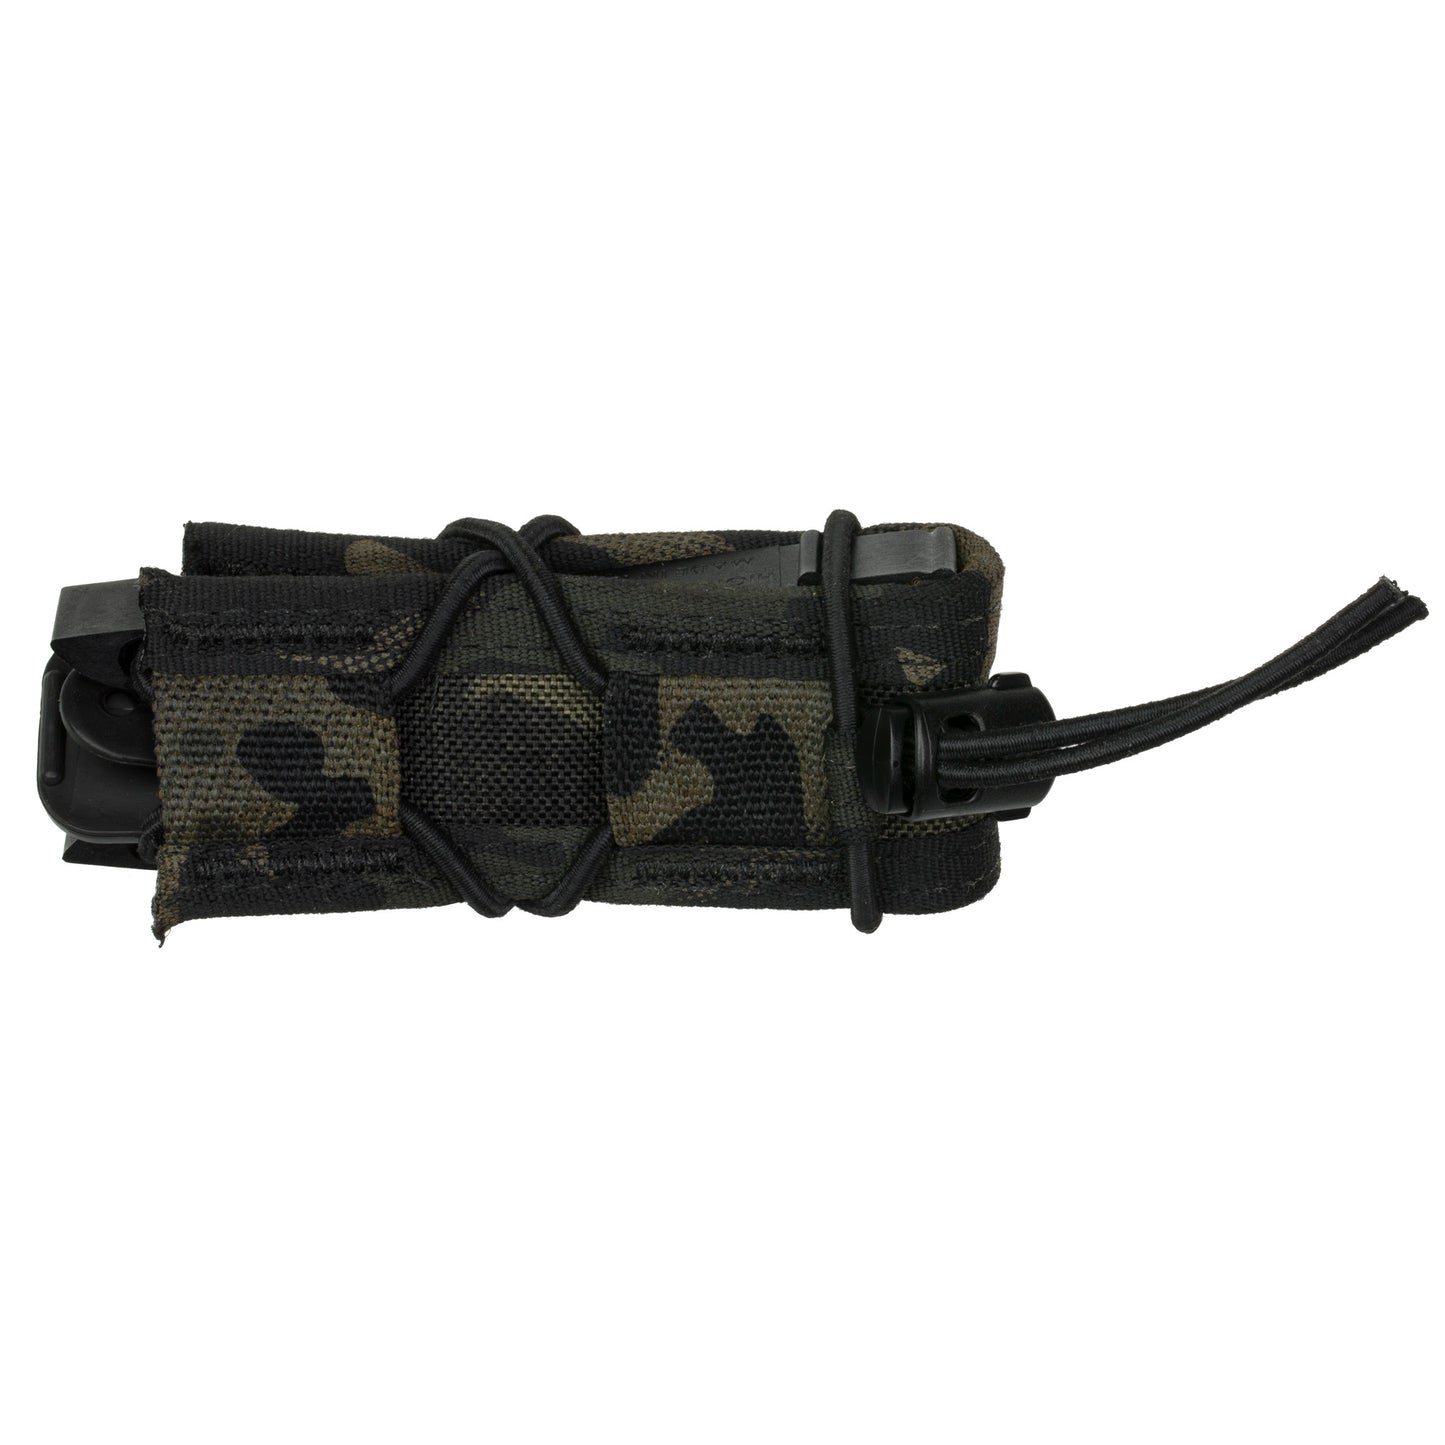 High Speed Gear, Pistol TACO, Single Magazine Pouch, Molle, Fits Most Pistol Magazines, Hybrid Kydex and Nylon, Multicam Black